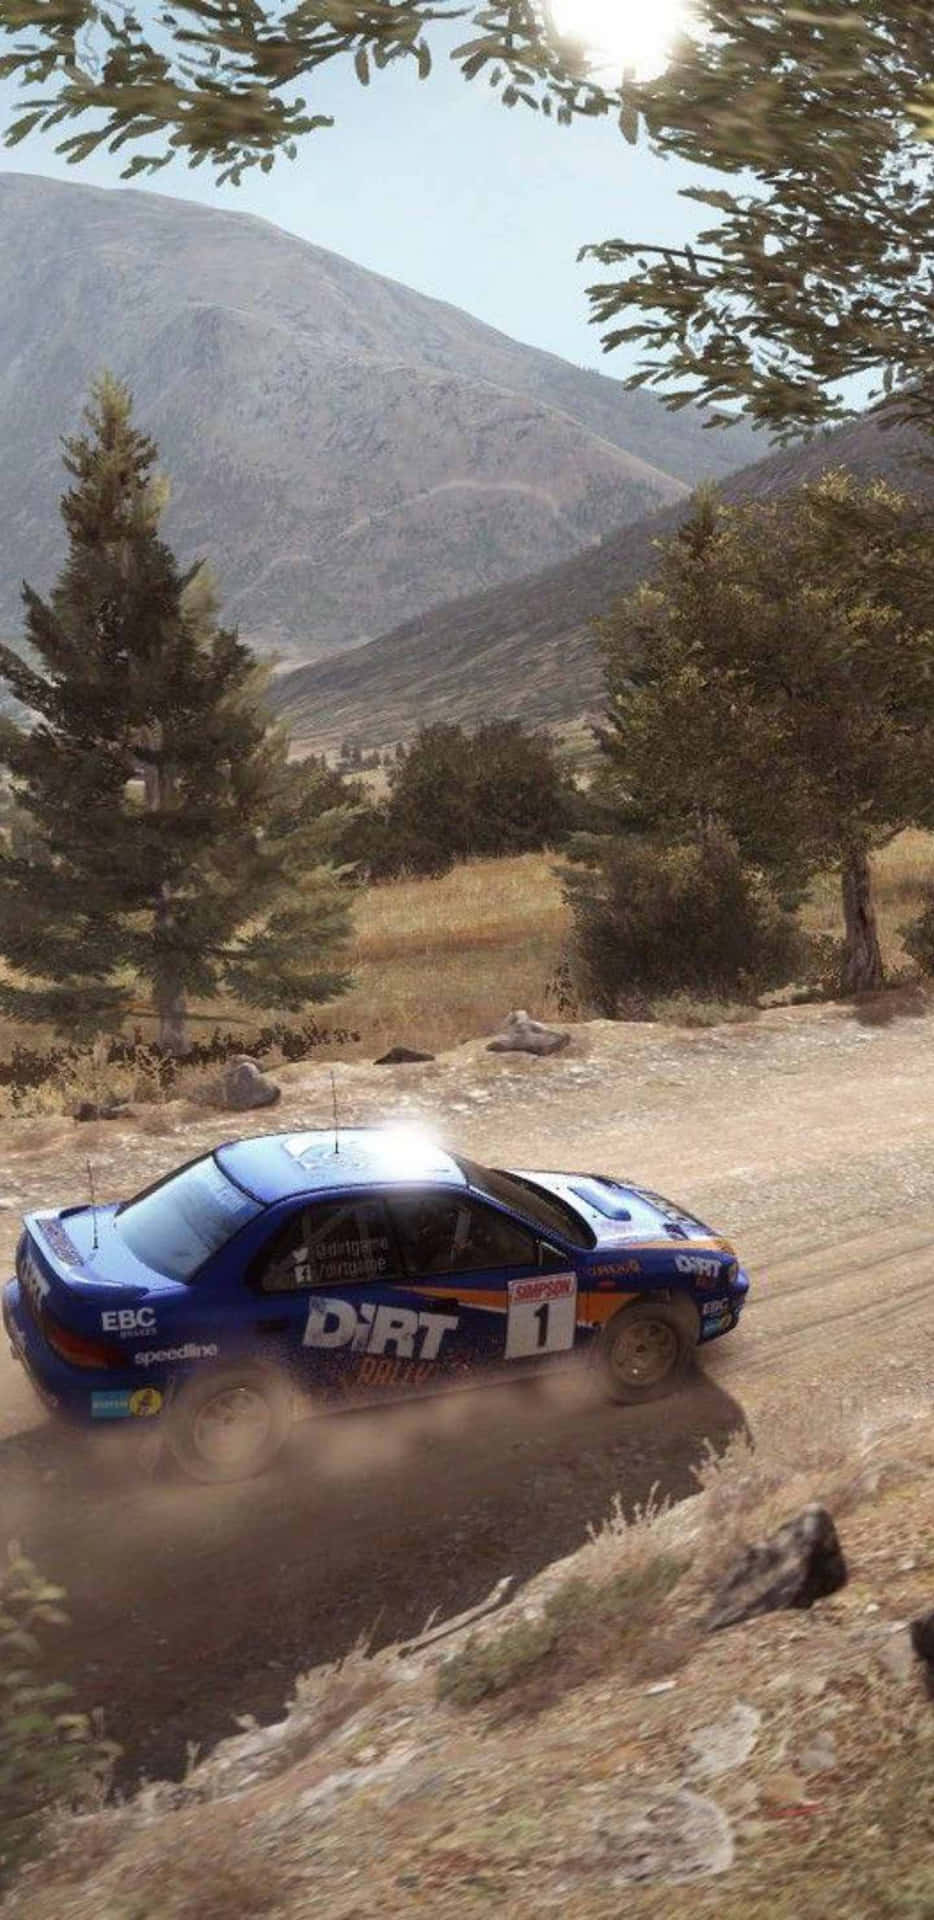 "Go Off-Road with Android Dirt Rally"